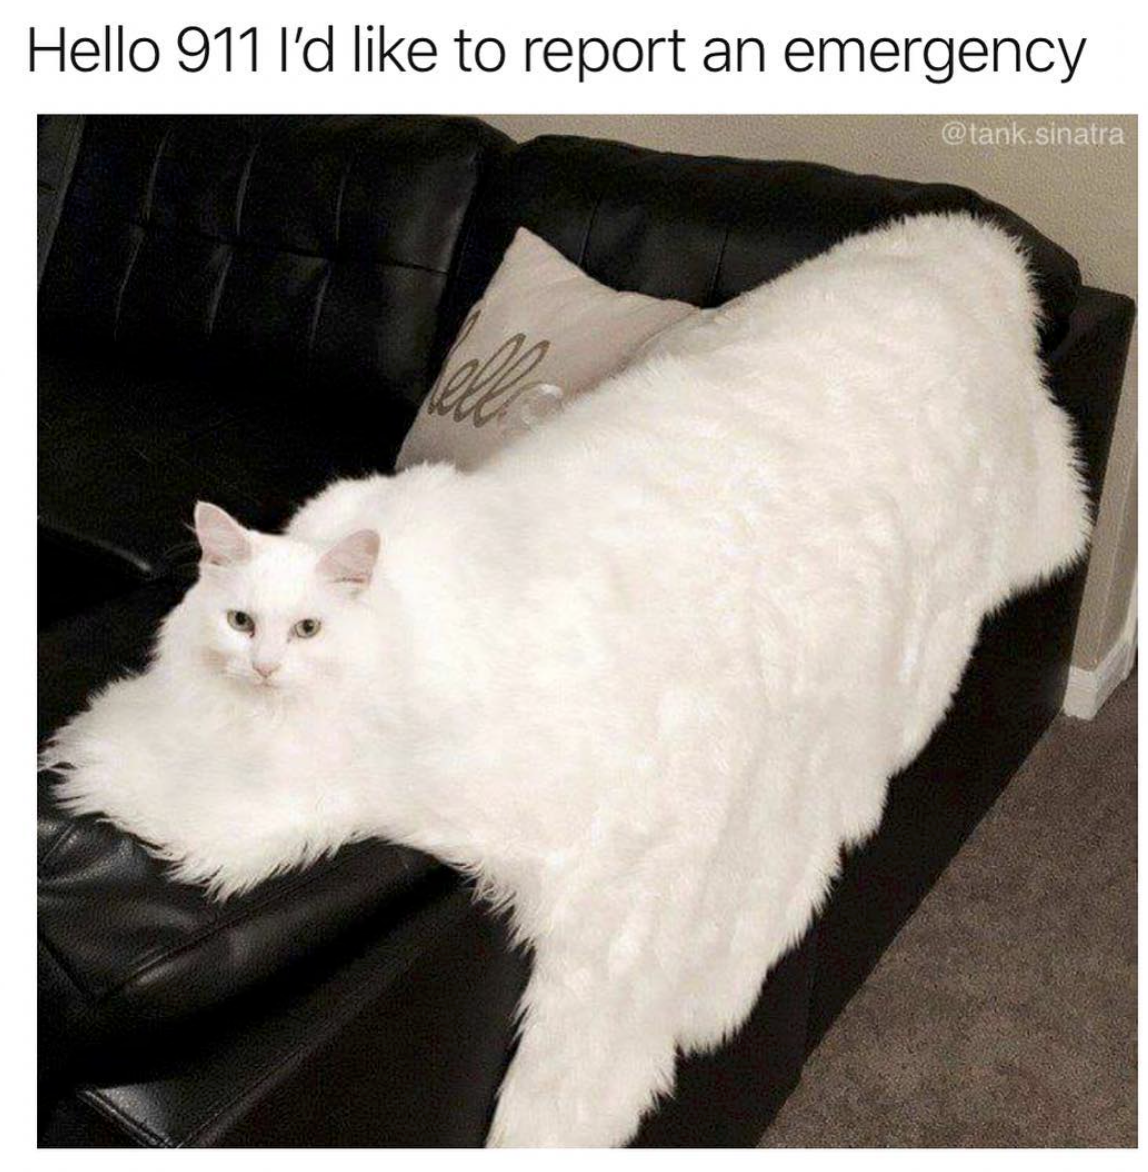 big white fluffy cat - Hello 911 I'd to report an emergency sinatra